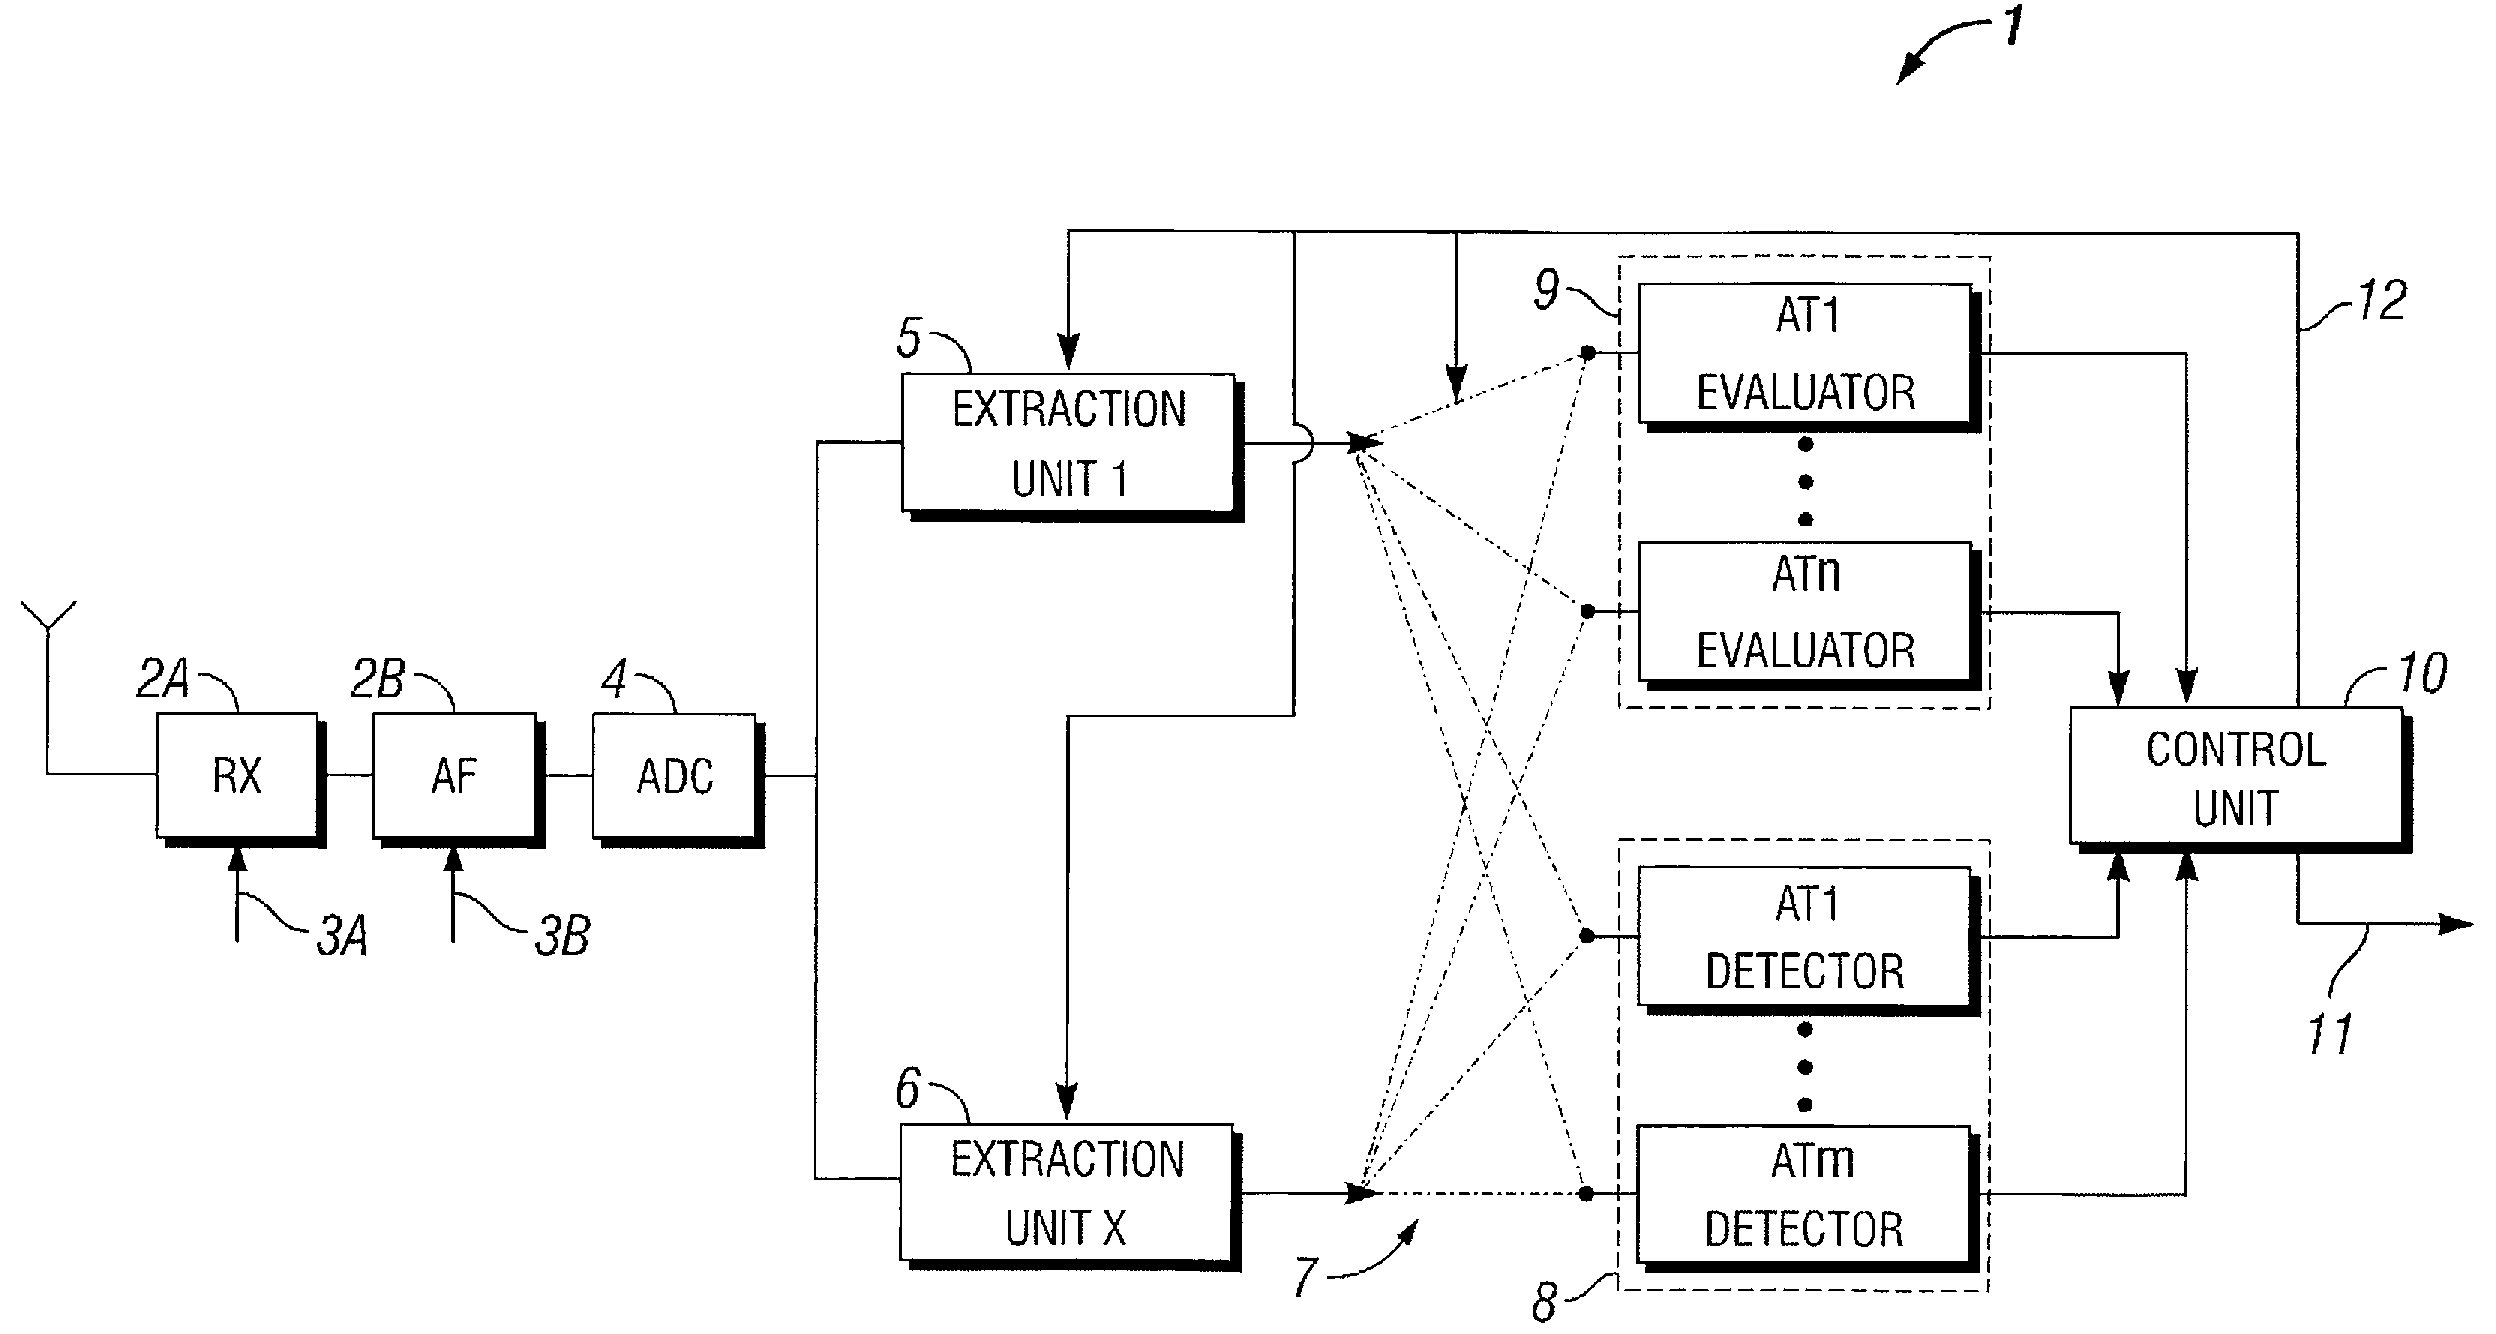 Apparatus and method for efficient inter radio access technology operation